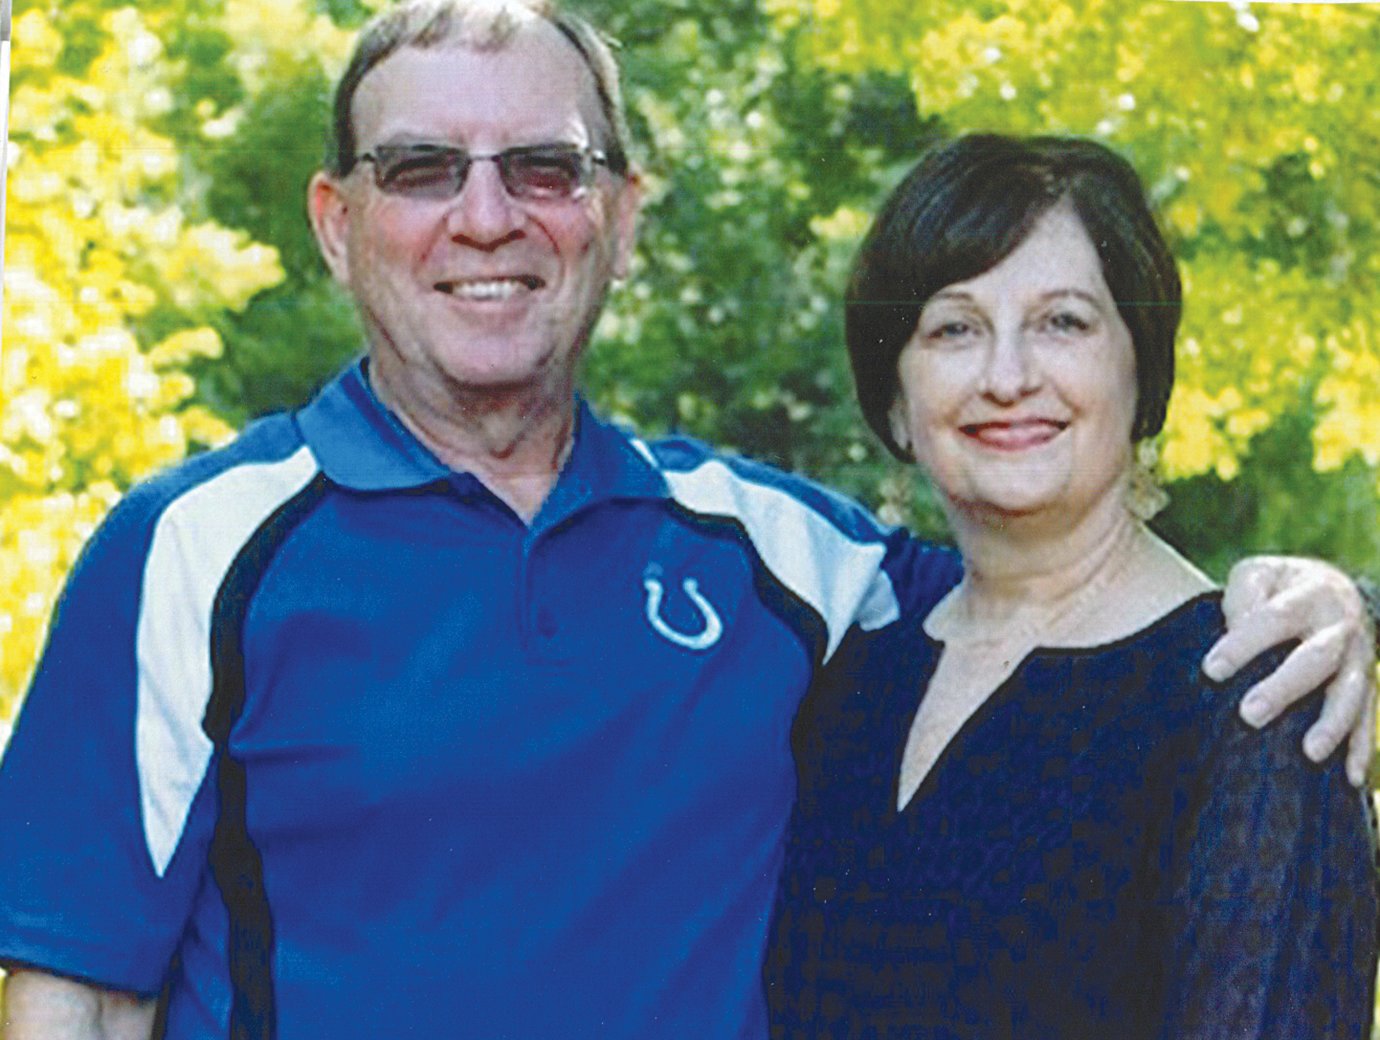 Rick and Becky Haas will celebrate their 50th wedding anniversary on June 20.